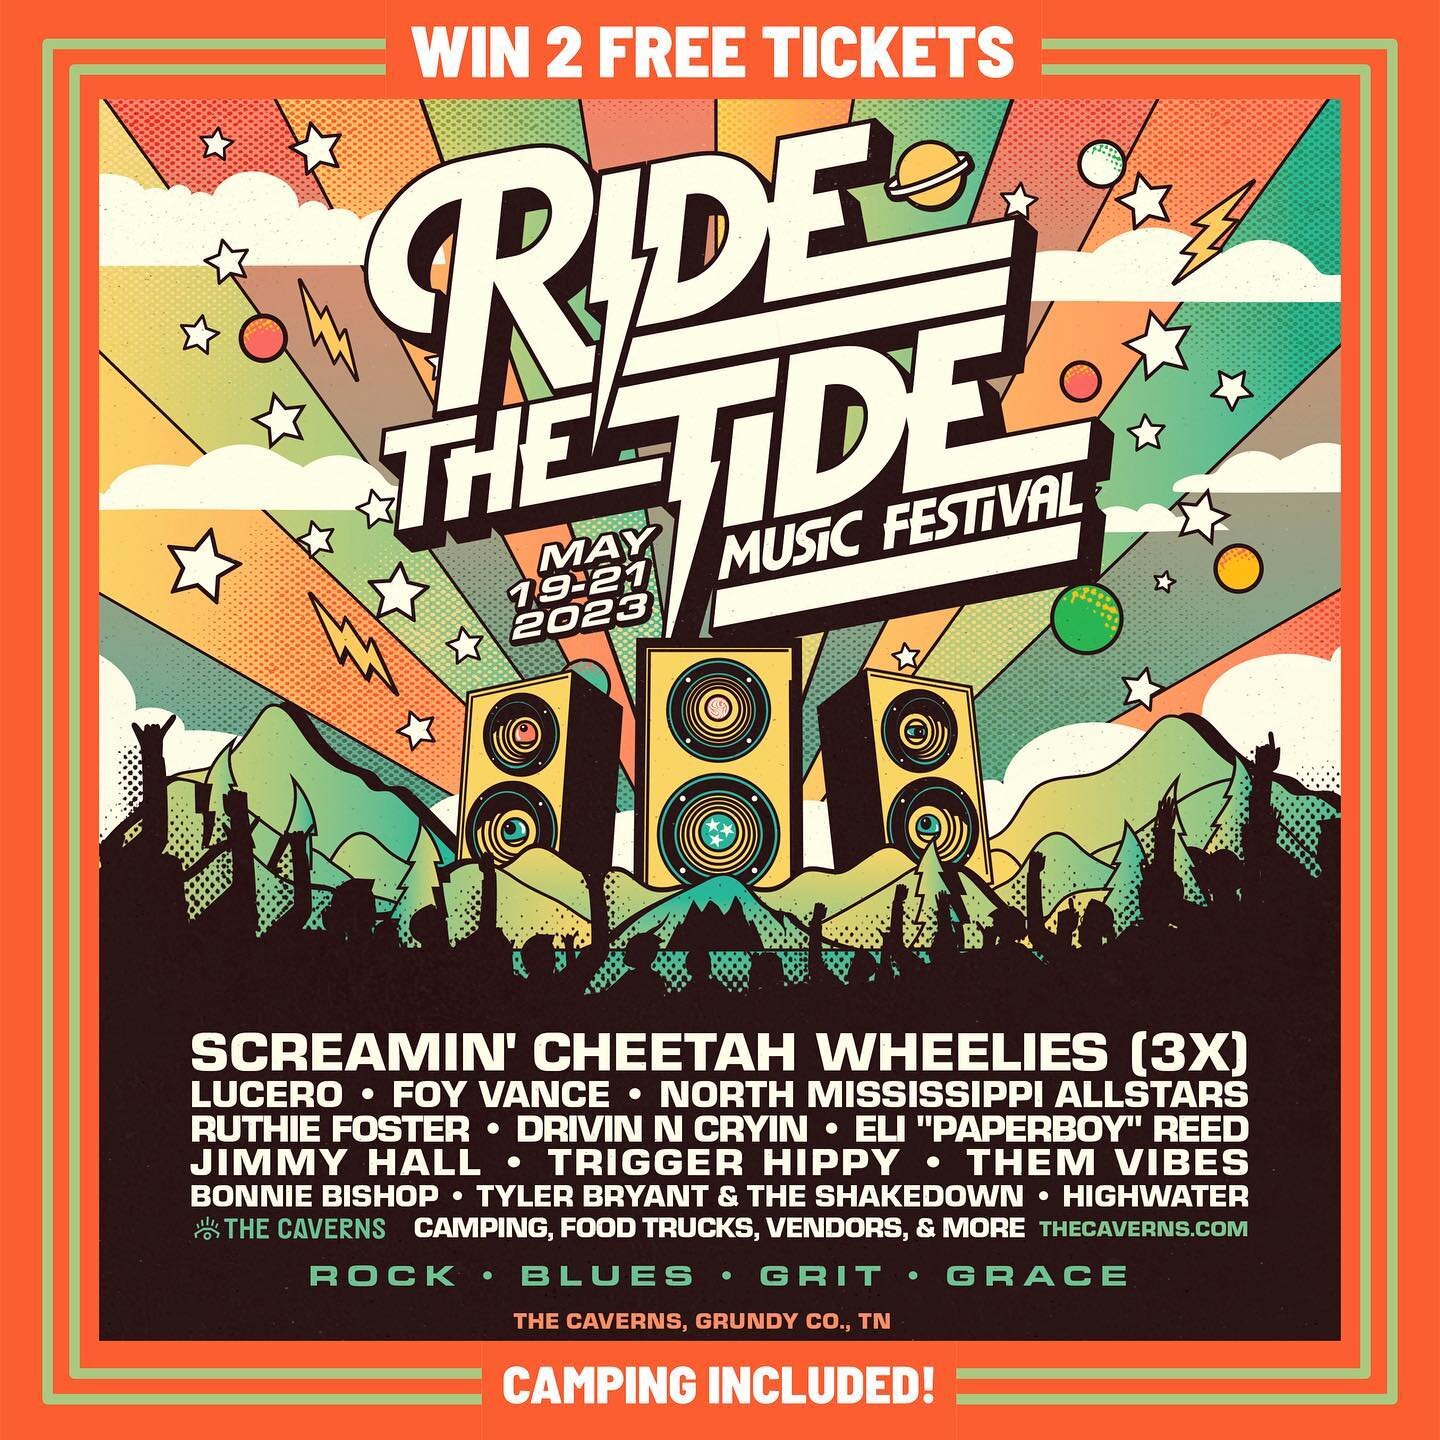 GIVEAWAY ALERT: Win a pair of tickets to Ride The Tide Music Festival on May 19th-21st! I'll be performing Saturday, but these tickets will get you access to all three days of the festival, with camping included. If you haven't been, this venue is in